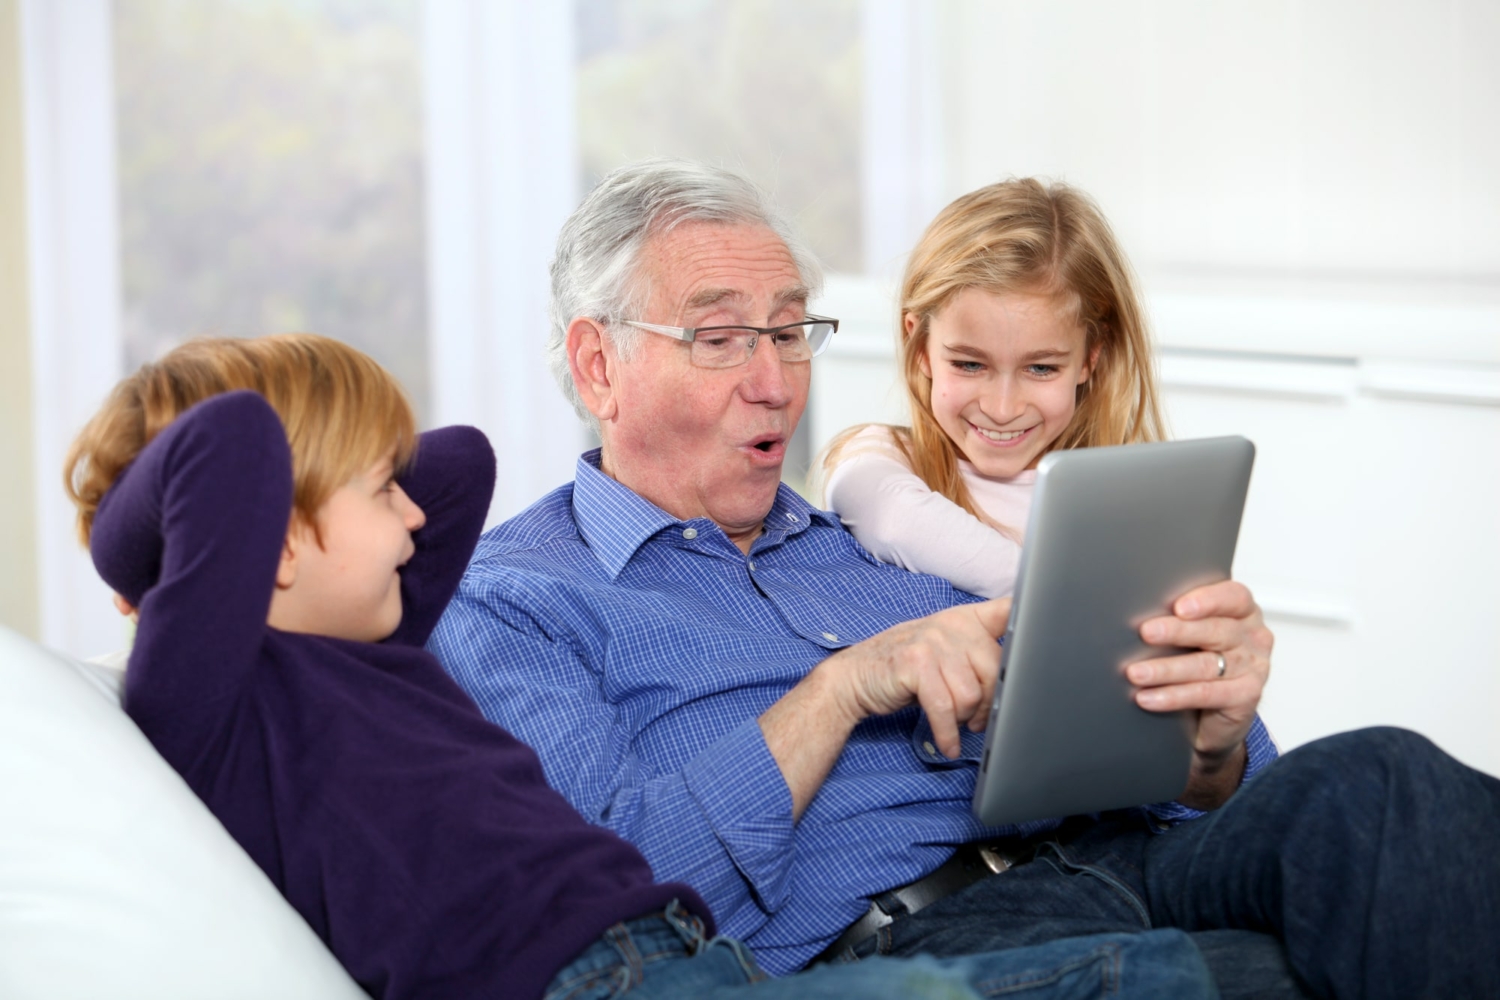 Senior man improving his tech skills on a tablet, sitting between two of his grandchildren on a couch.